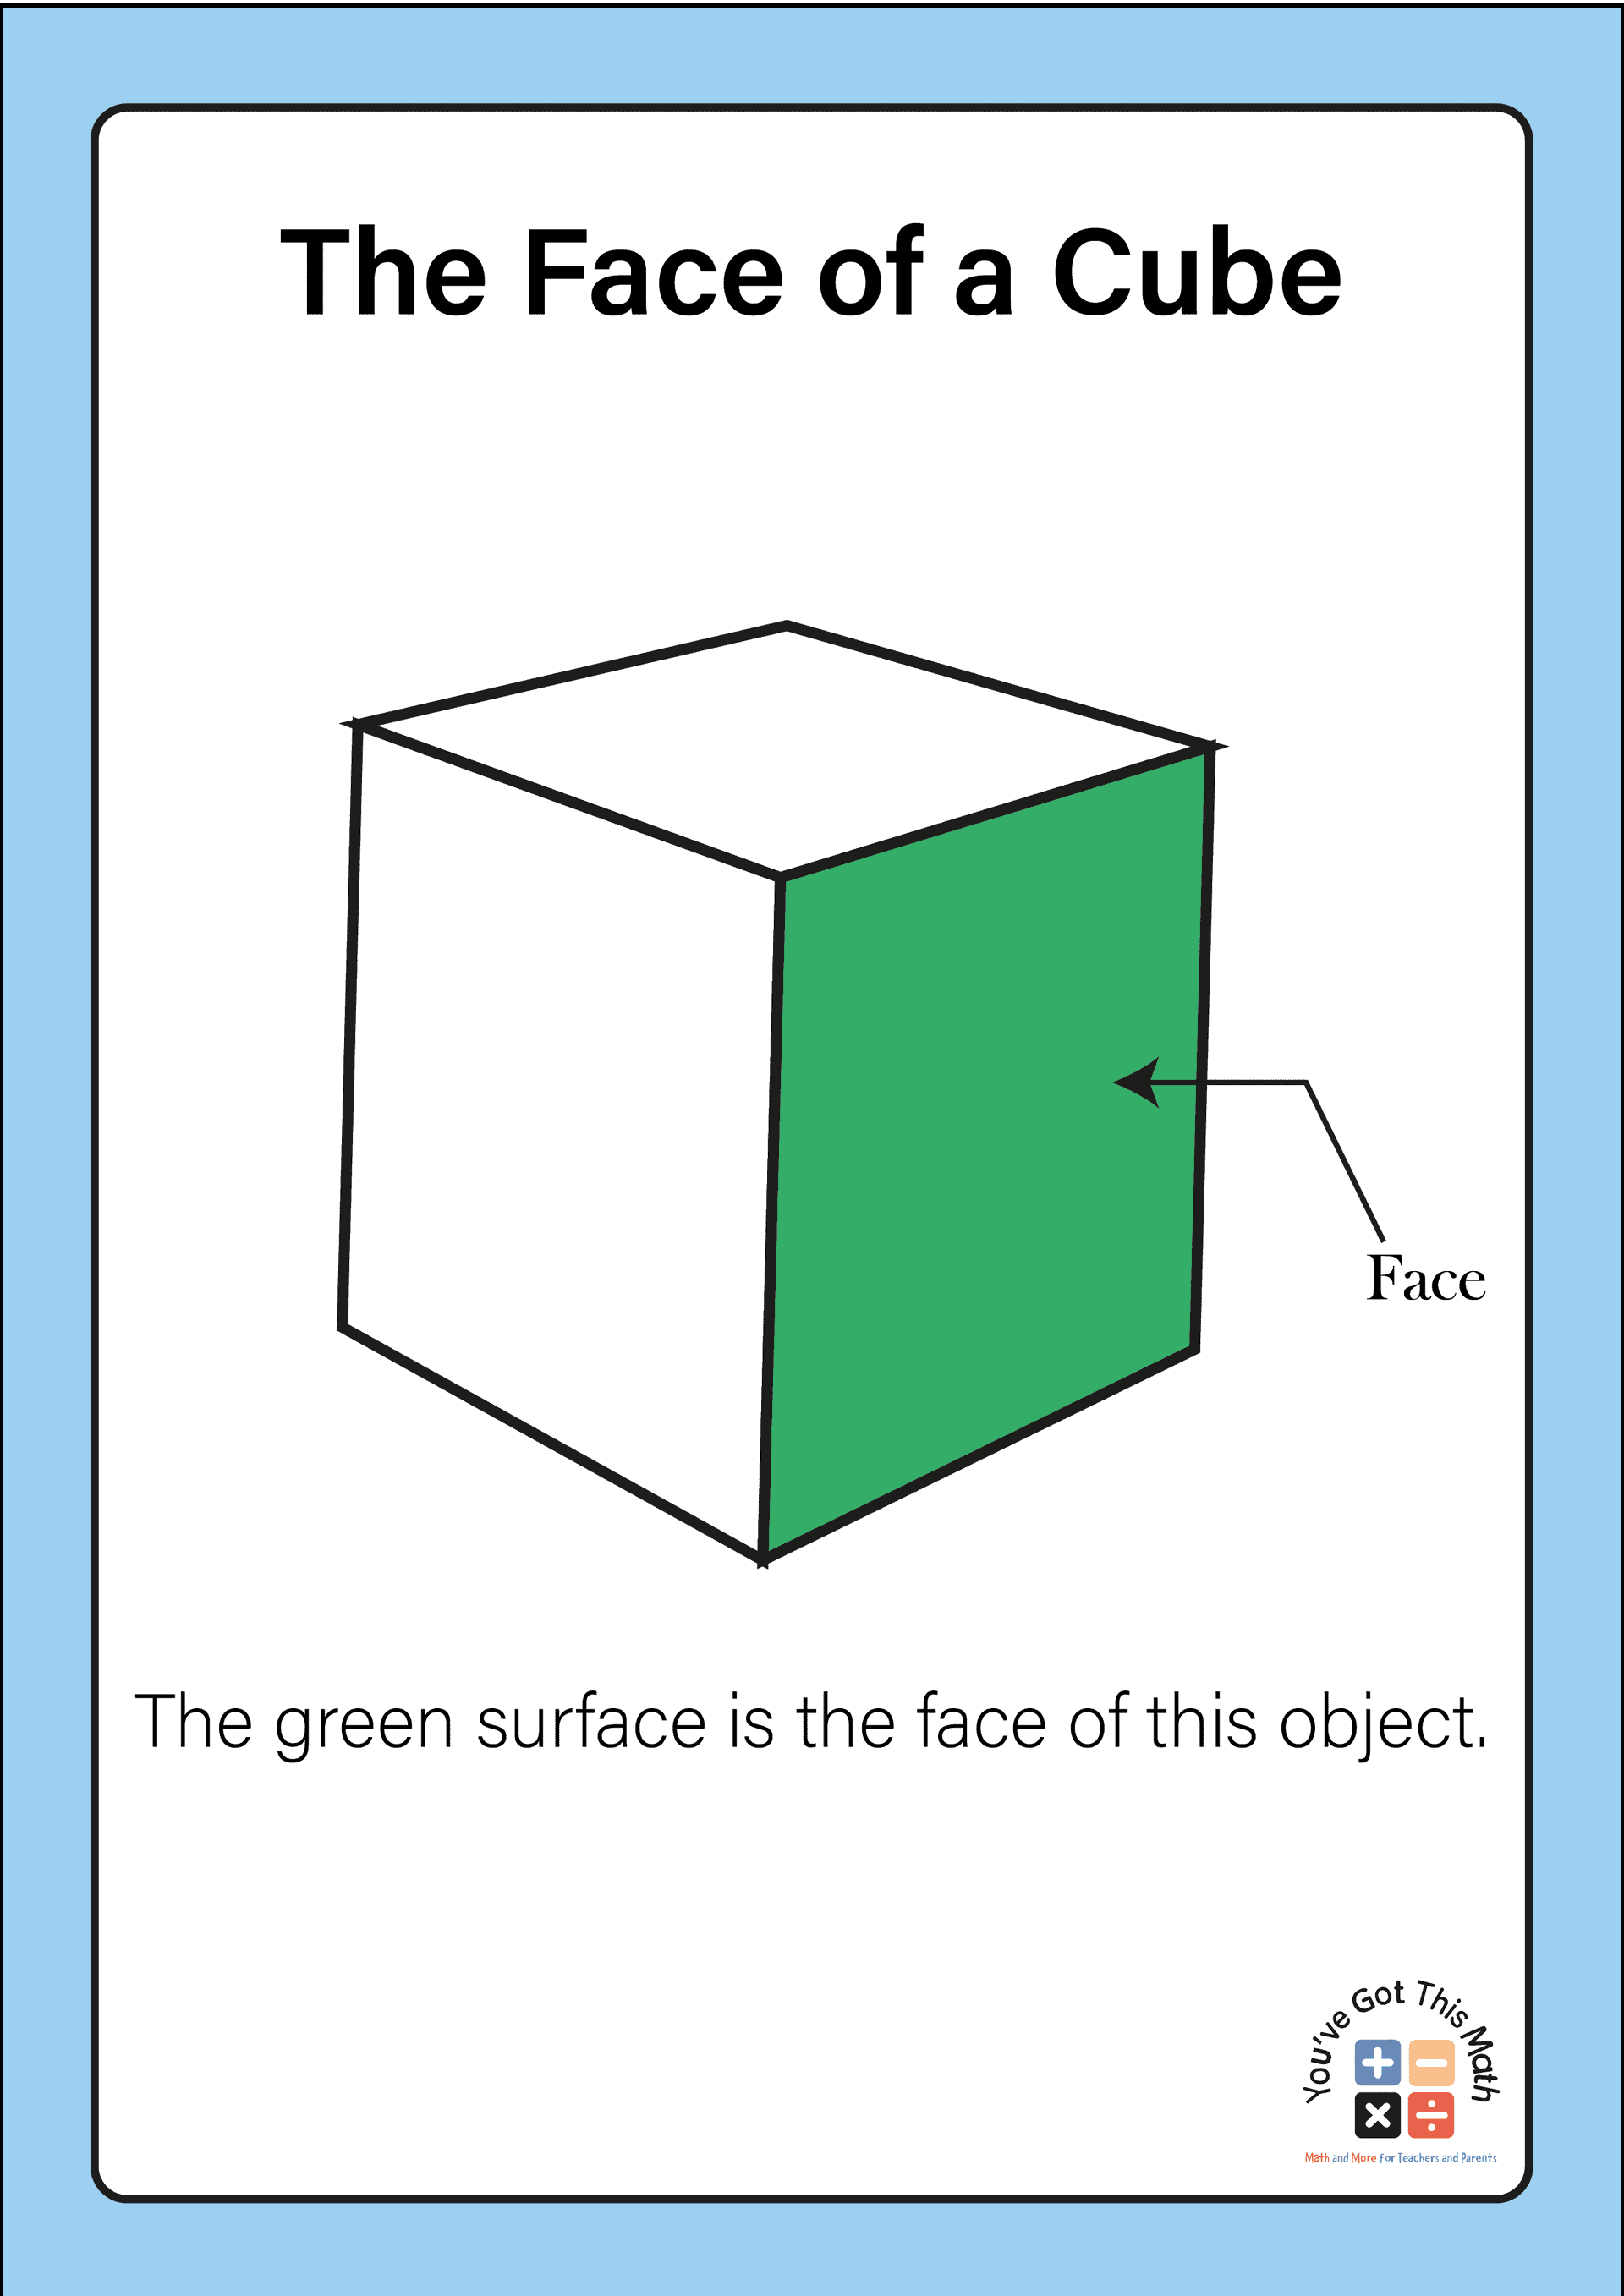 1- Face of a cube